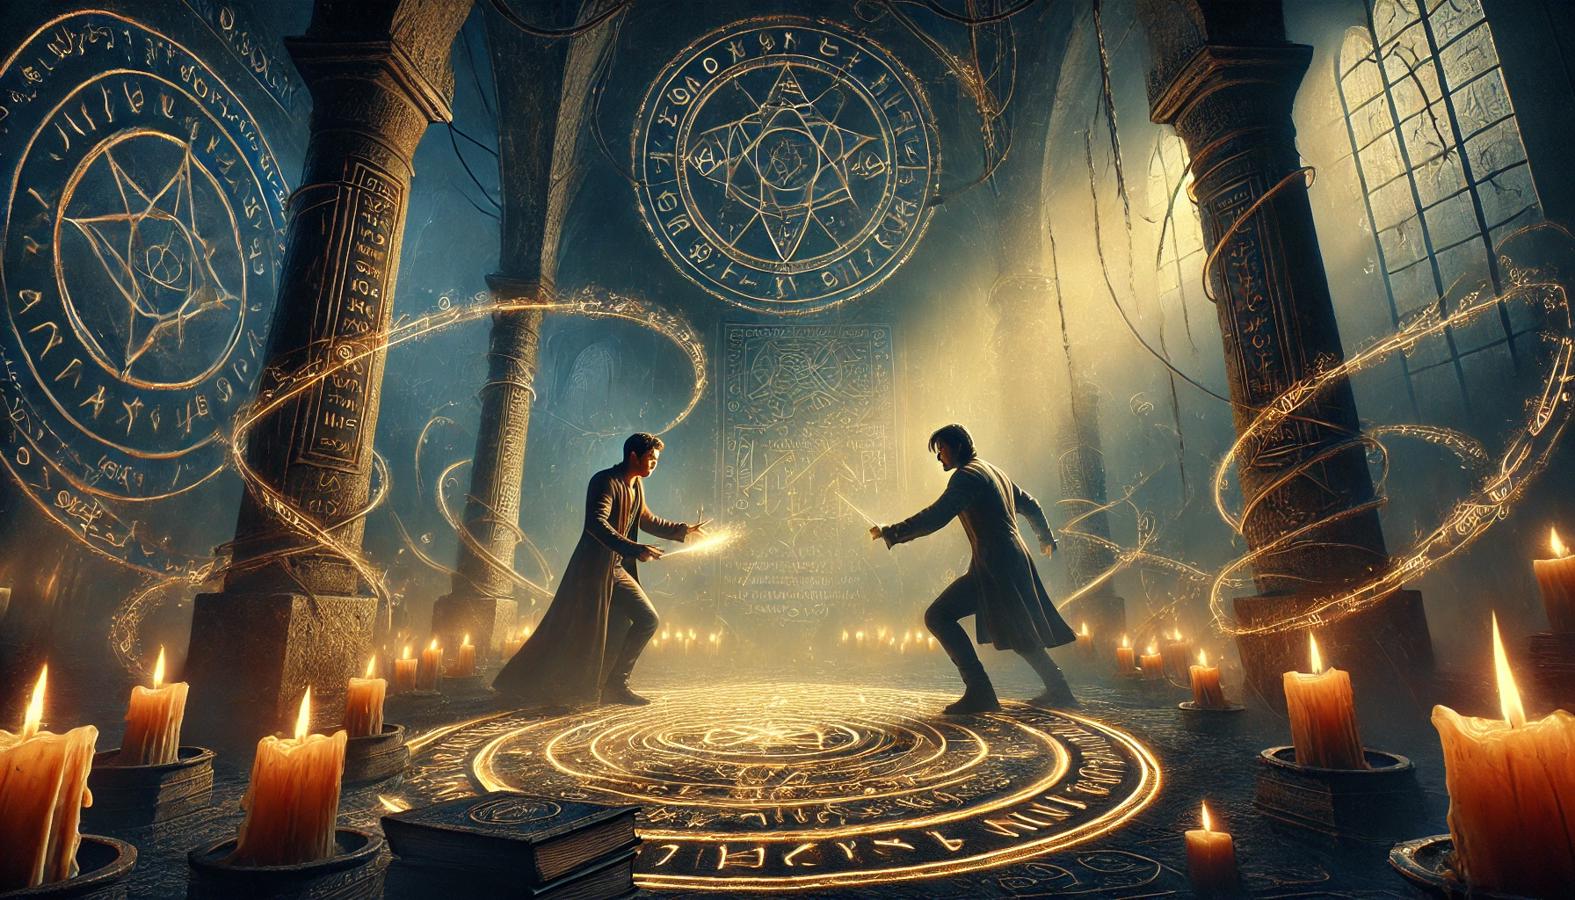 Edgar and Alaric performing the Ritual of Binding in a hidden chamber, shadows twisting around them.